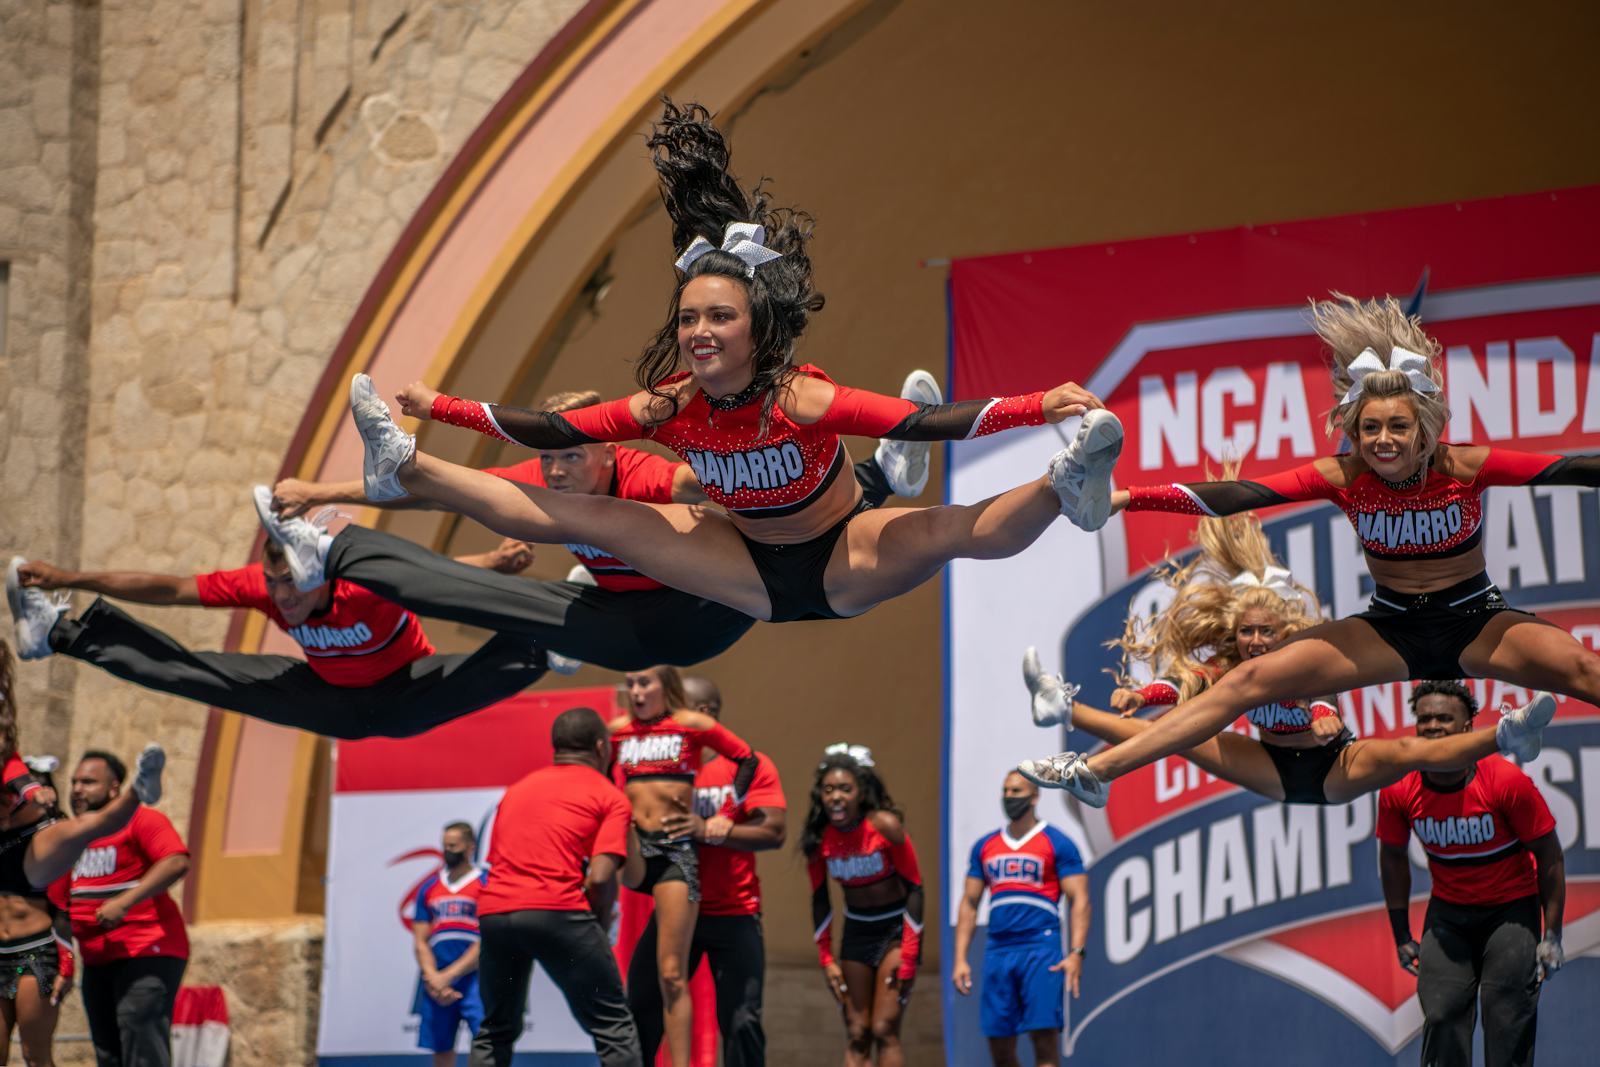 Who Won Daytona In 2022? 'Cheer' Squads Navarro & TVCC Competed After